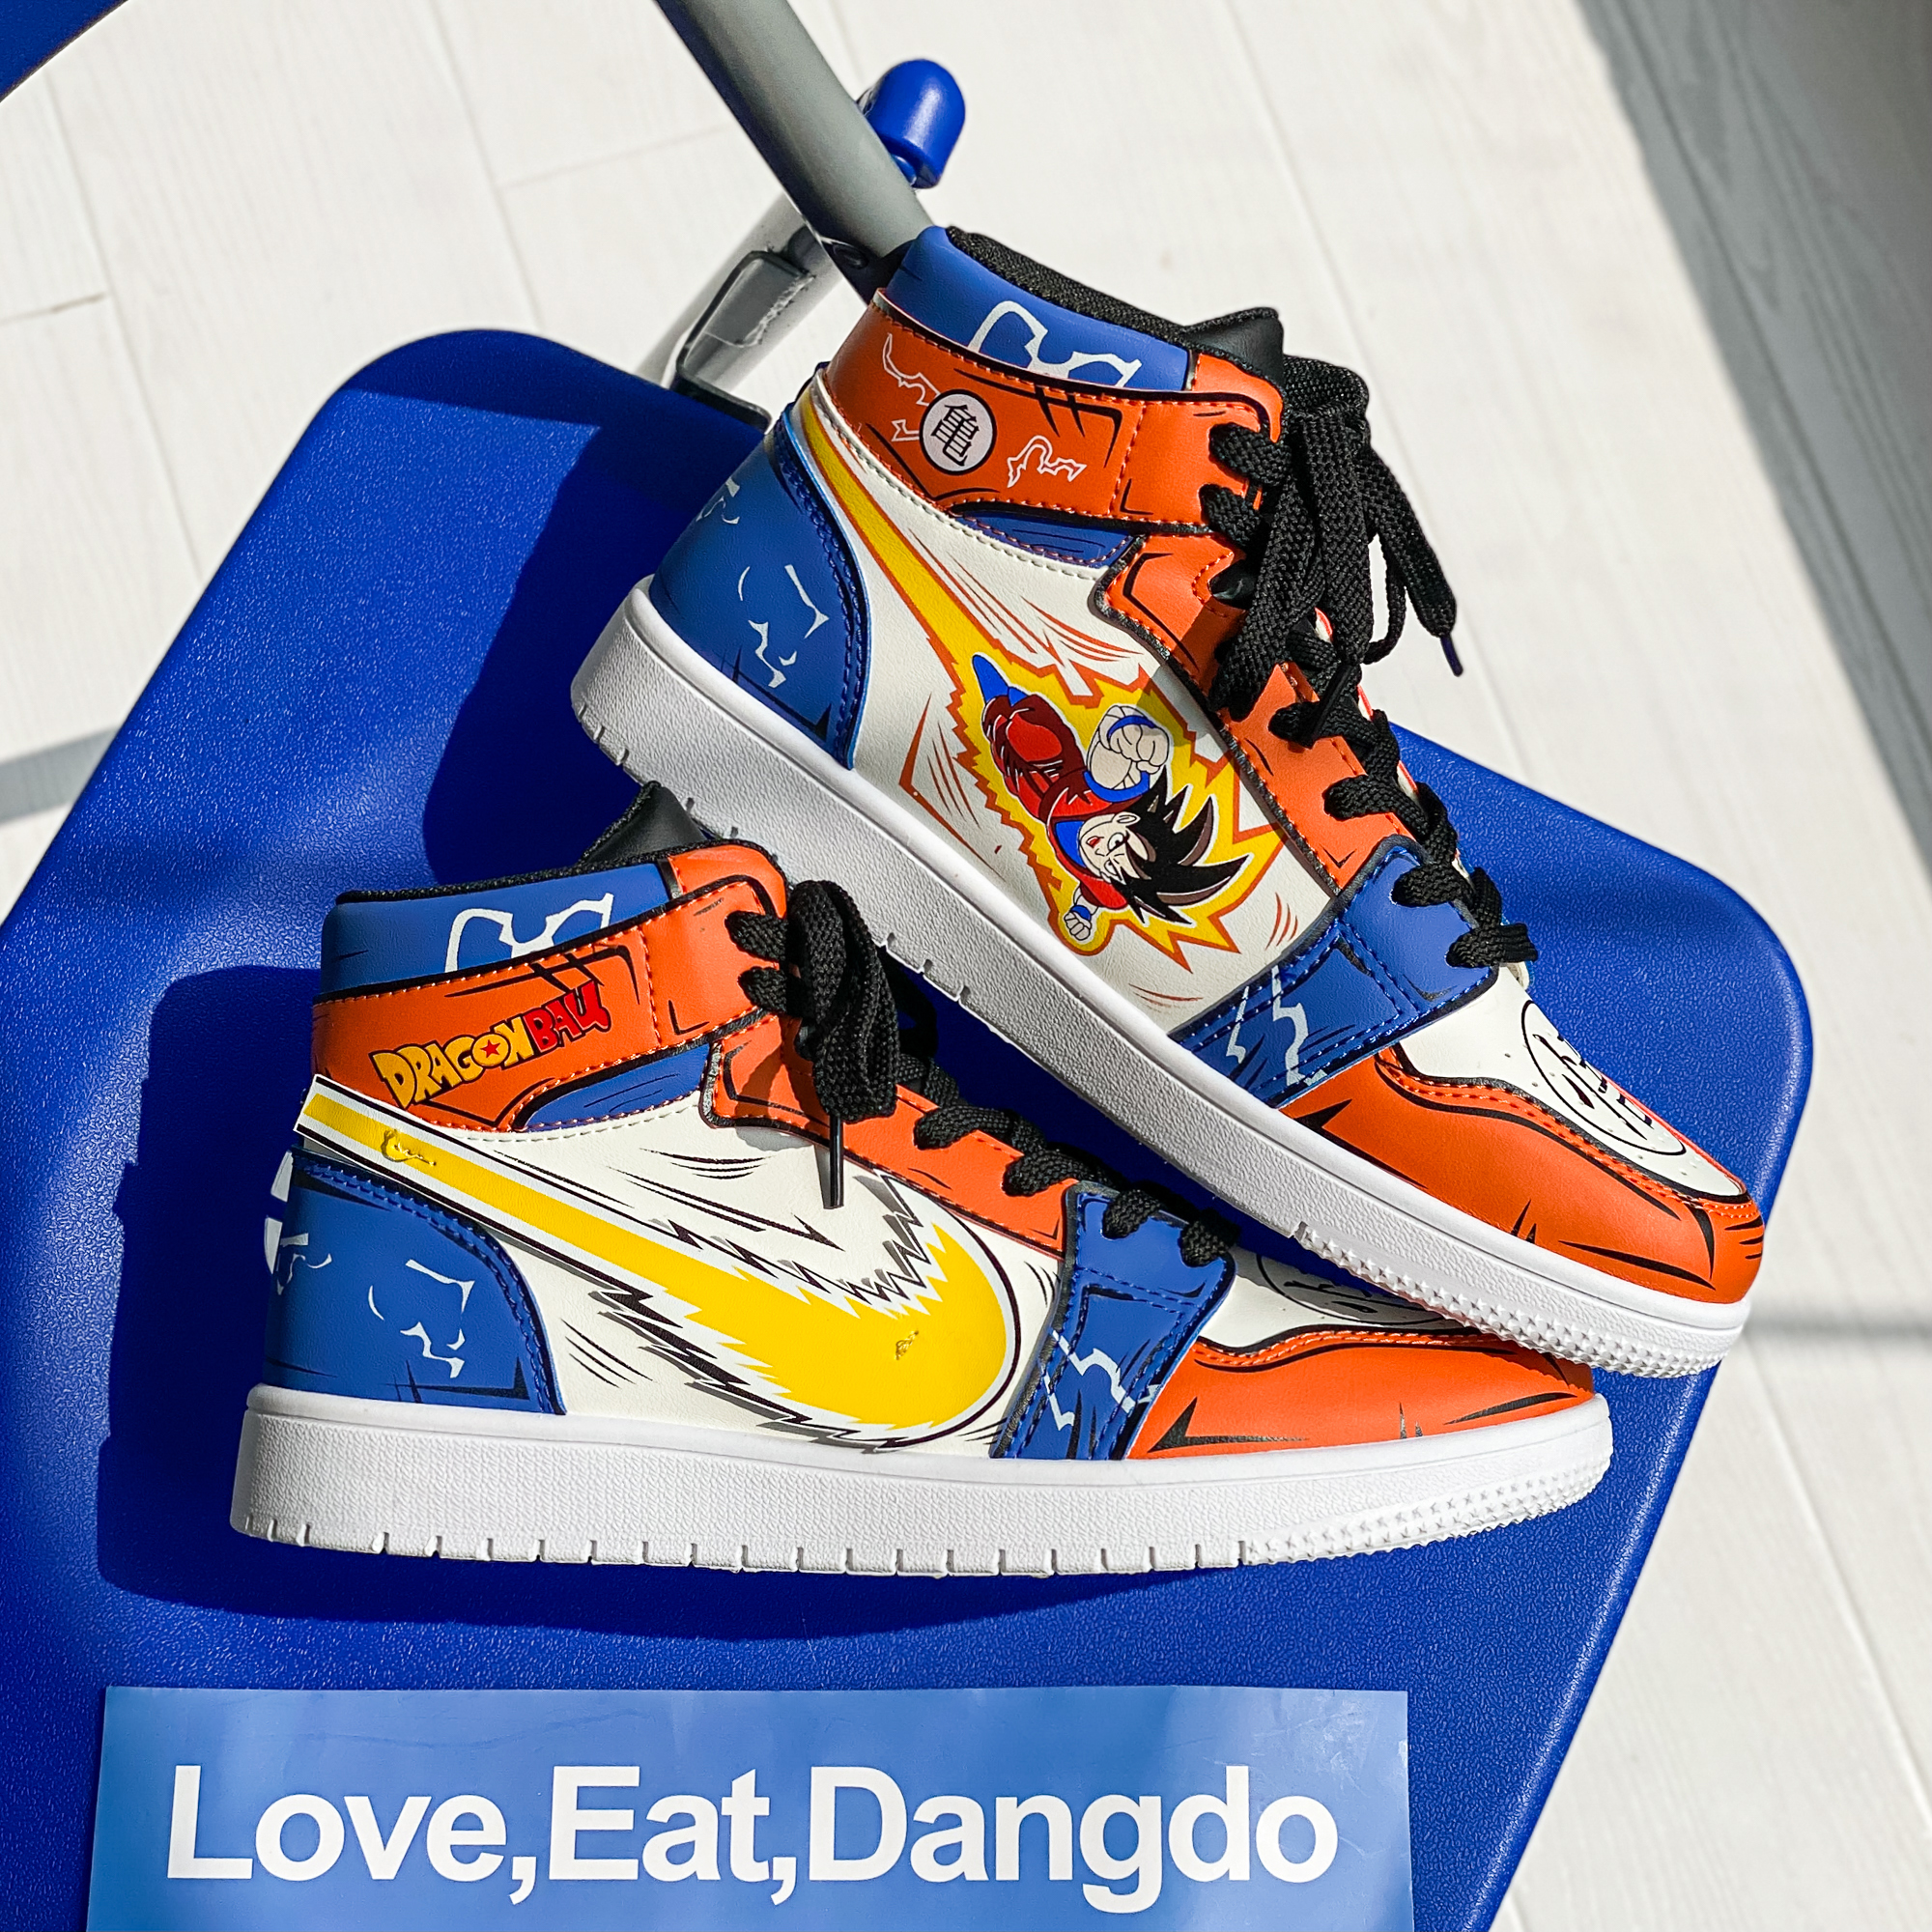 Dragon Ball – Goku and Vegeta Themed Amazing Shoes (2 Designs) Shoes & Slippers